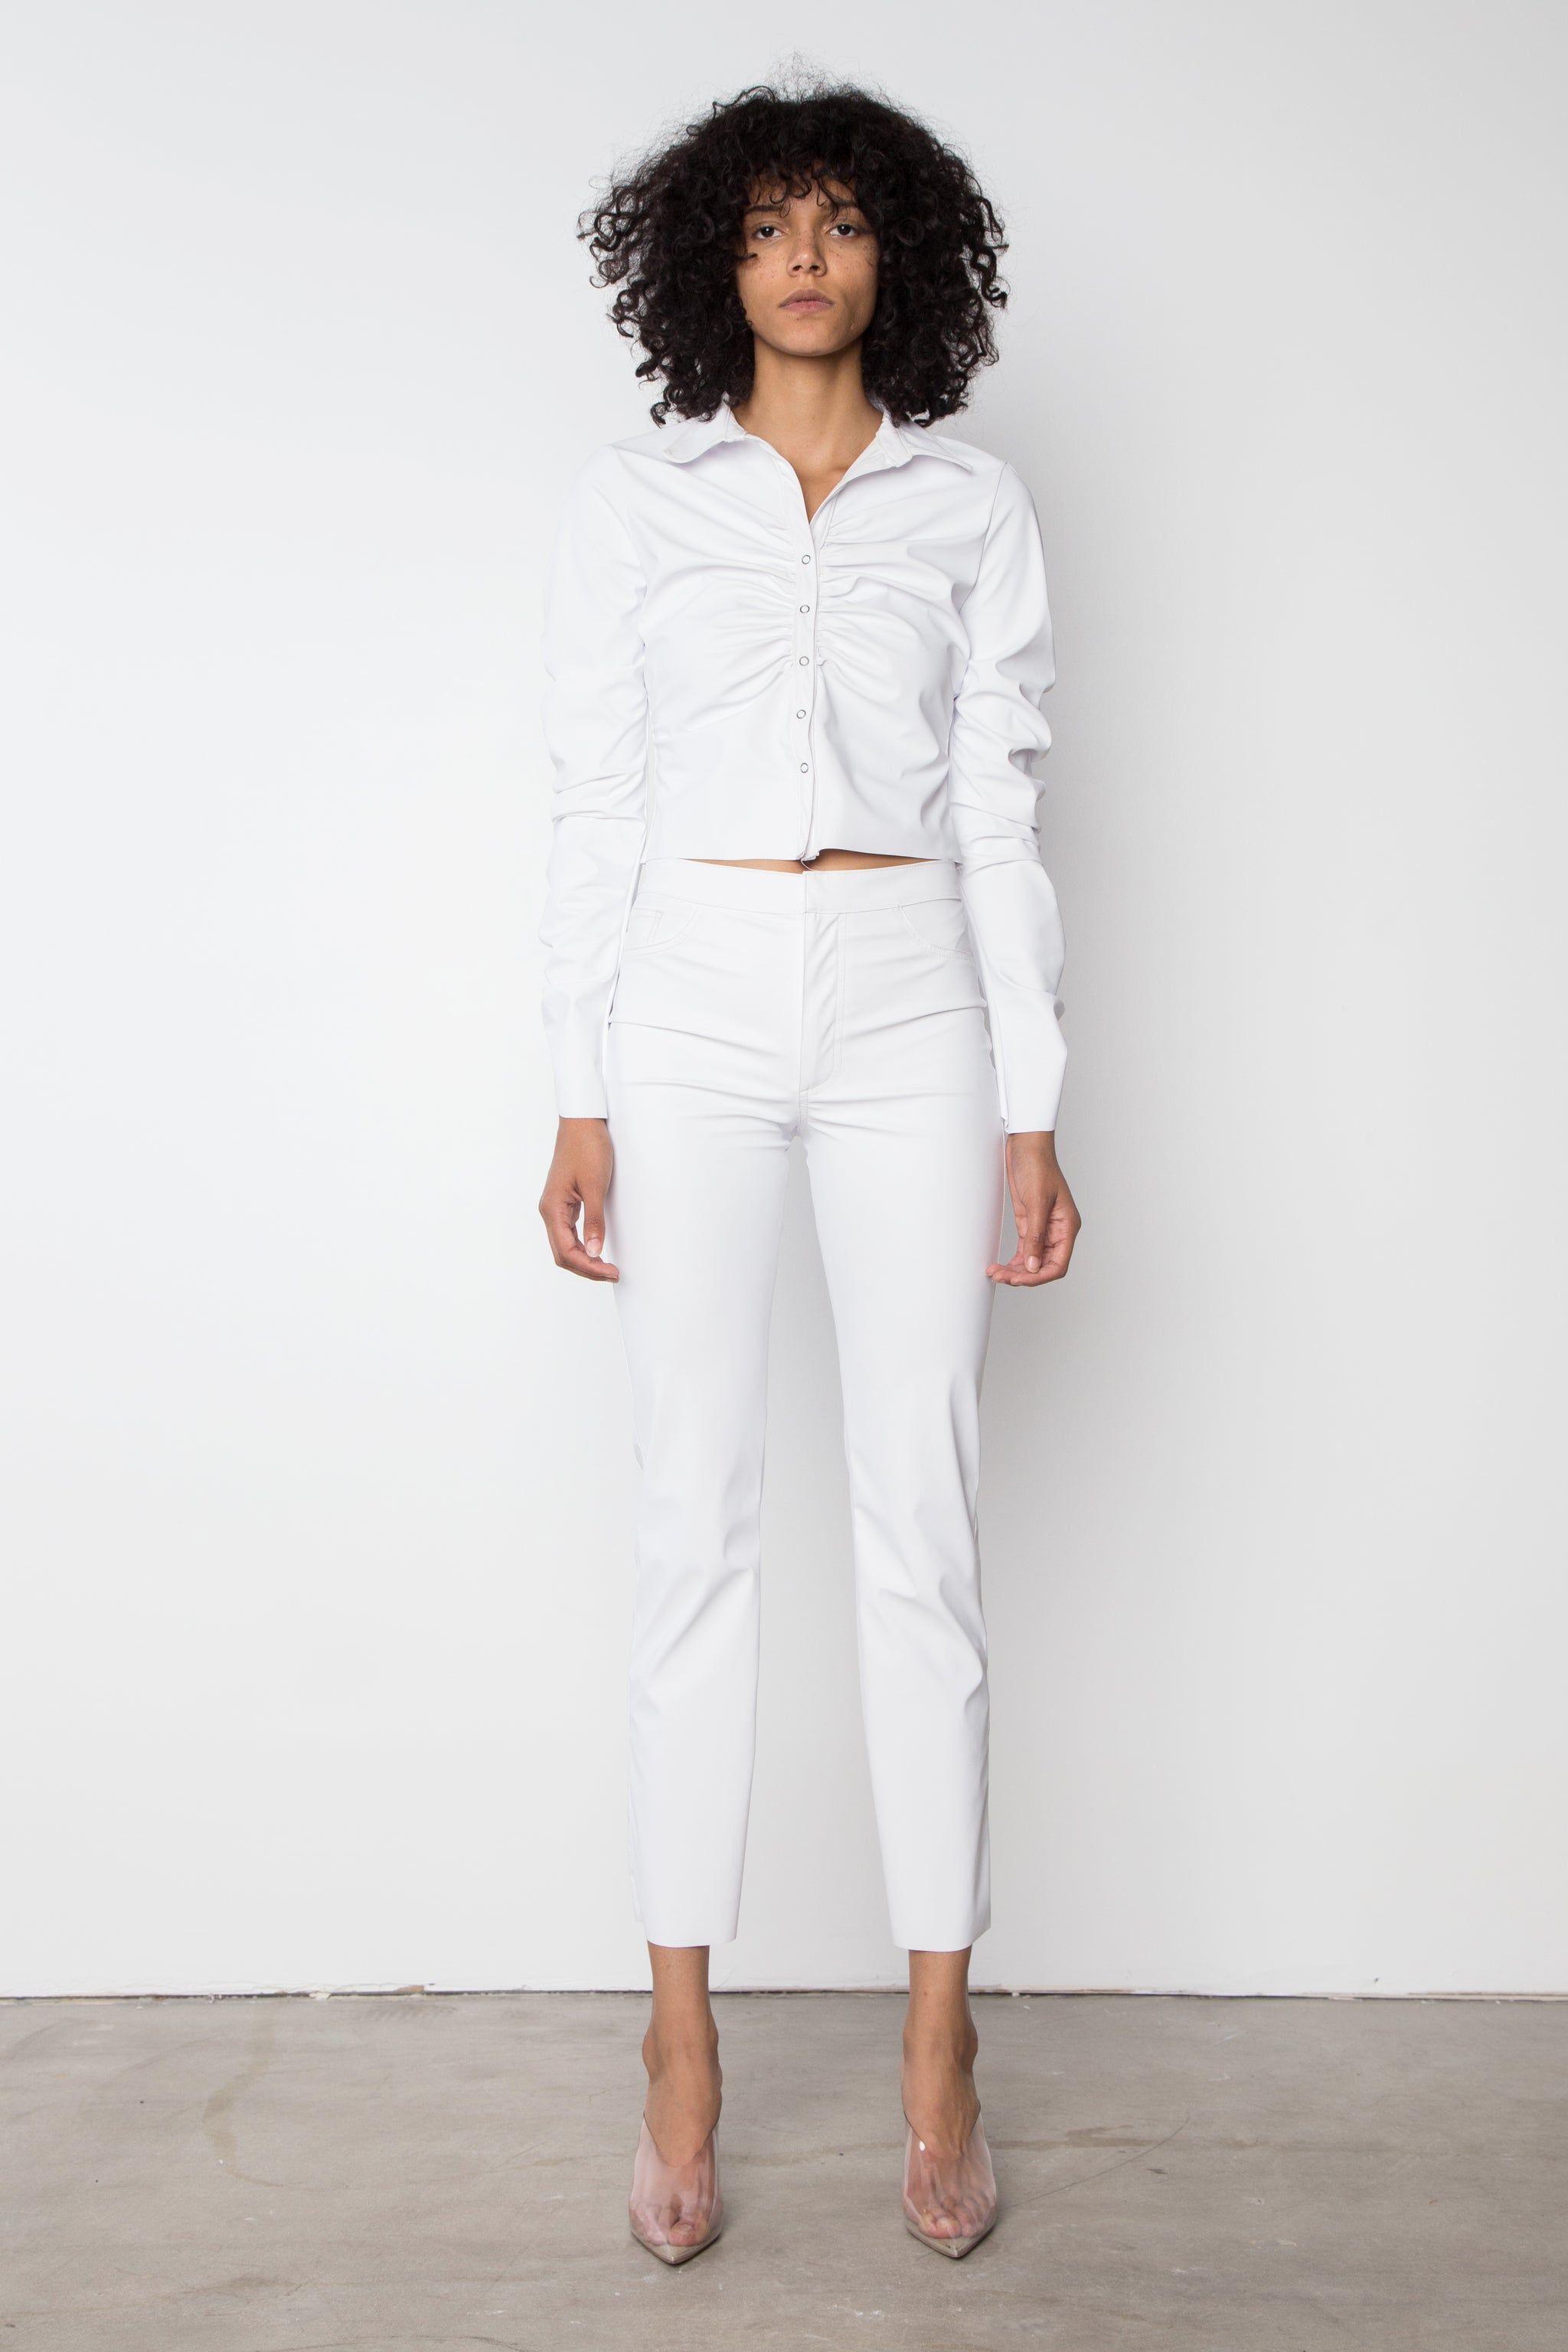 Framework vein Fifty The Absolute Best White Jeans To Shop Now